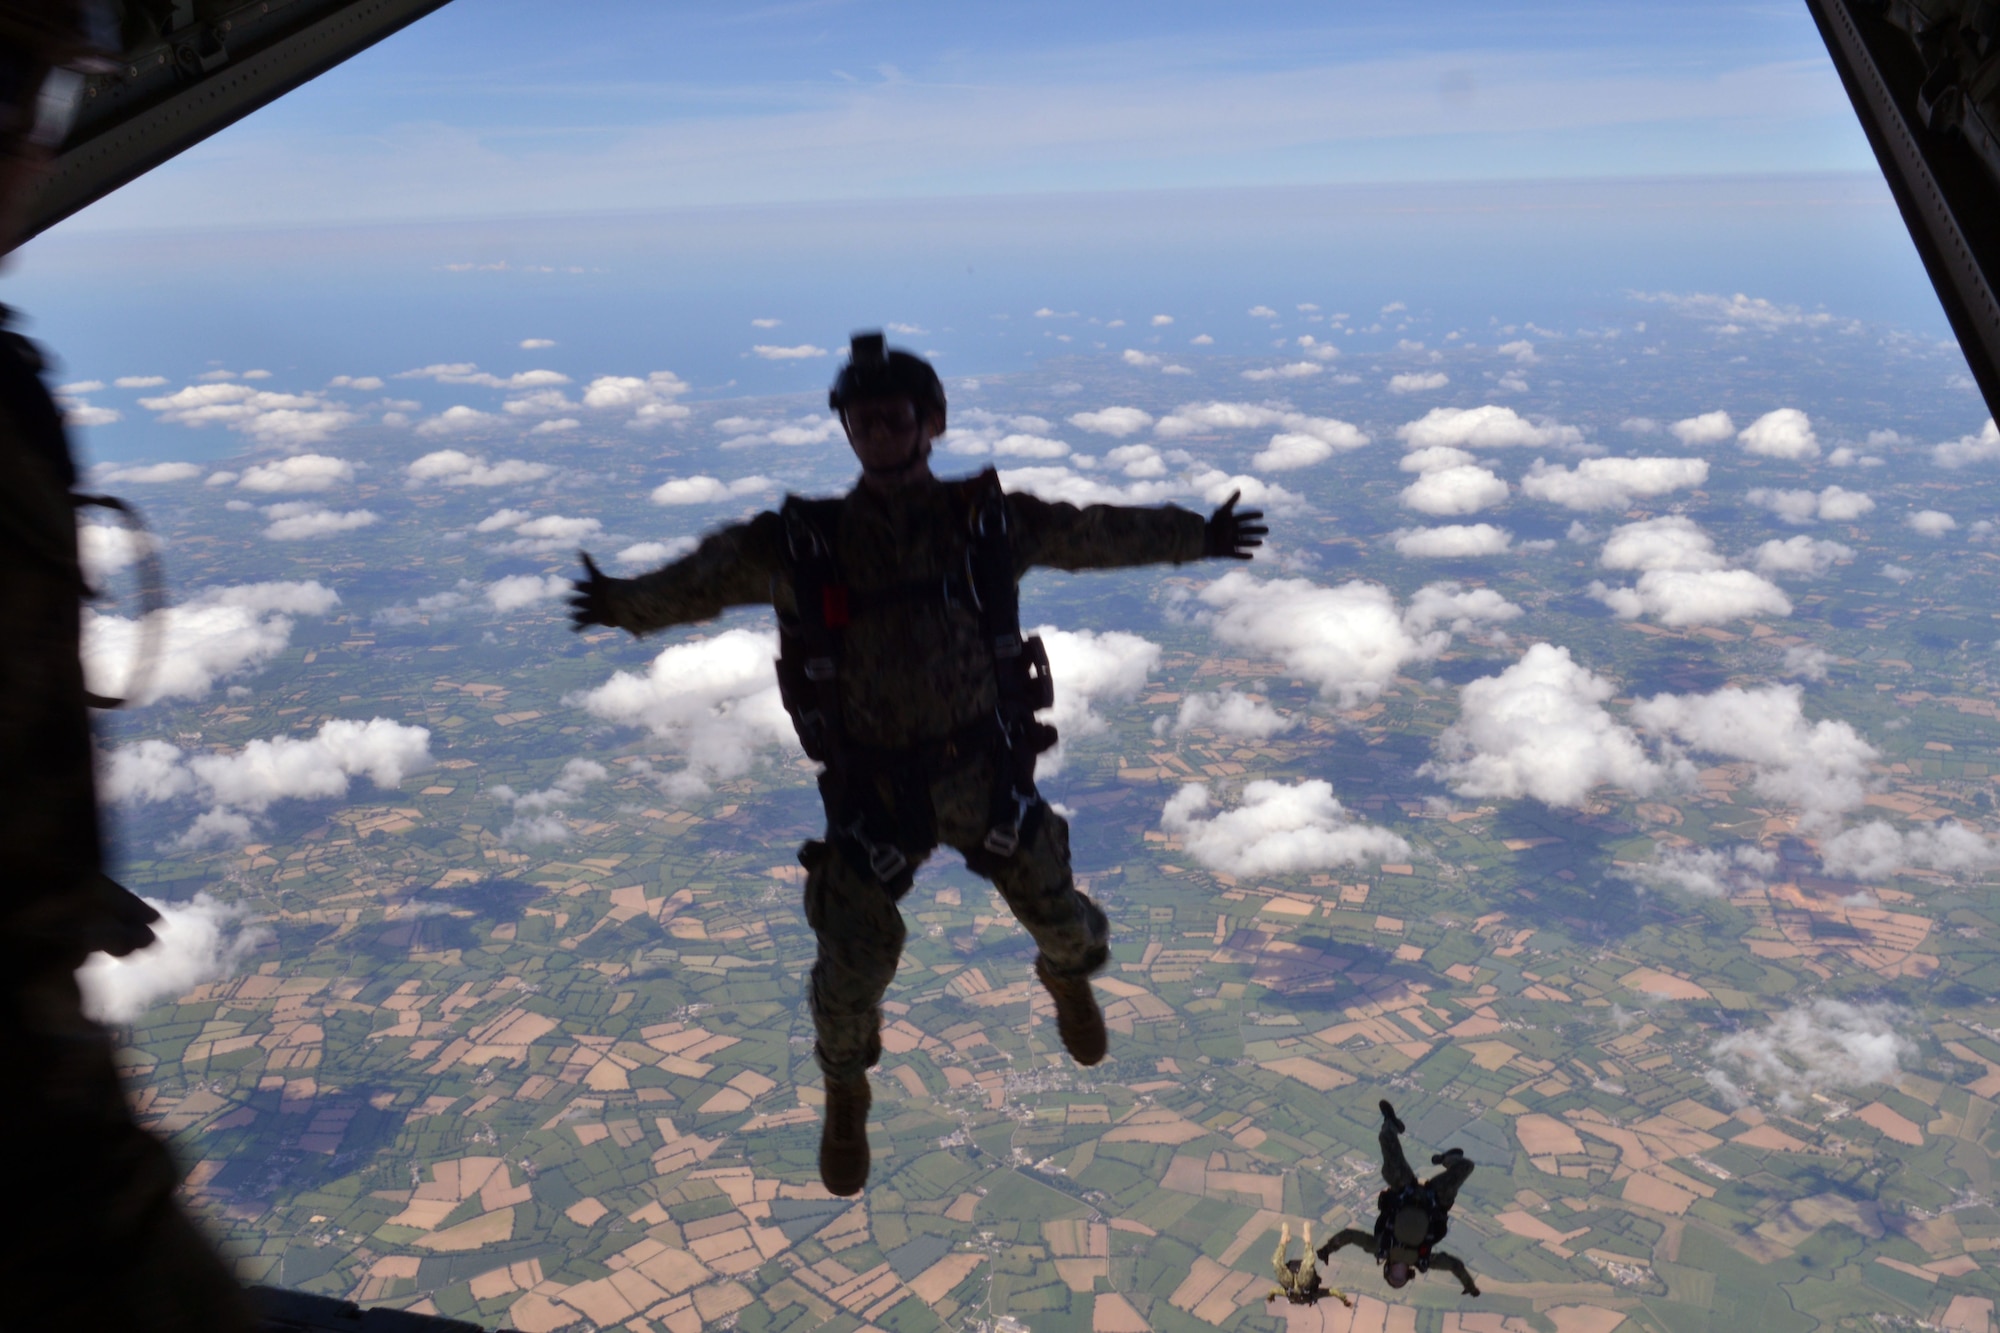 U.S. Special Operations Command -- Europe operators jump off the ramp of an MC-130J Commando II assigned to the 67th Special Operations Squadron at RAF Mildenhall, England, to perform military free fall to the historic La Fiere drop zone near Sainte Mere Eglise, Normandy, France, June 7, 2015, to commemorate the 71st anniversary of D-Day. More than 60 SOCEUR operators performed the MFF jumps which were a small portion of the commemorative events which took place in strategic World War II sites throughout Normandy. (U.S. Air Force photo by Tech. Sgt. Stacia Zachary)